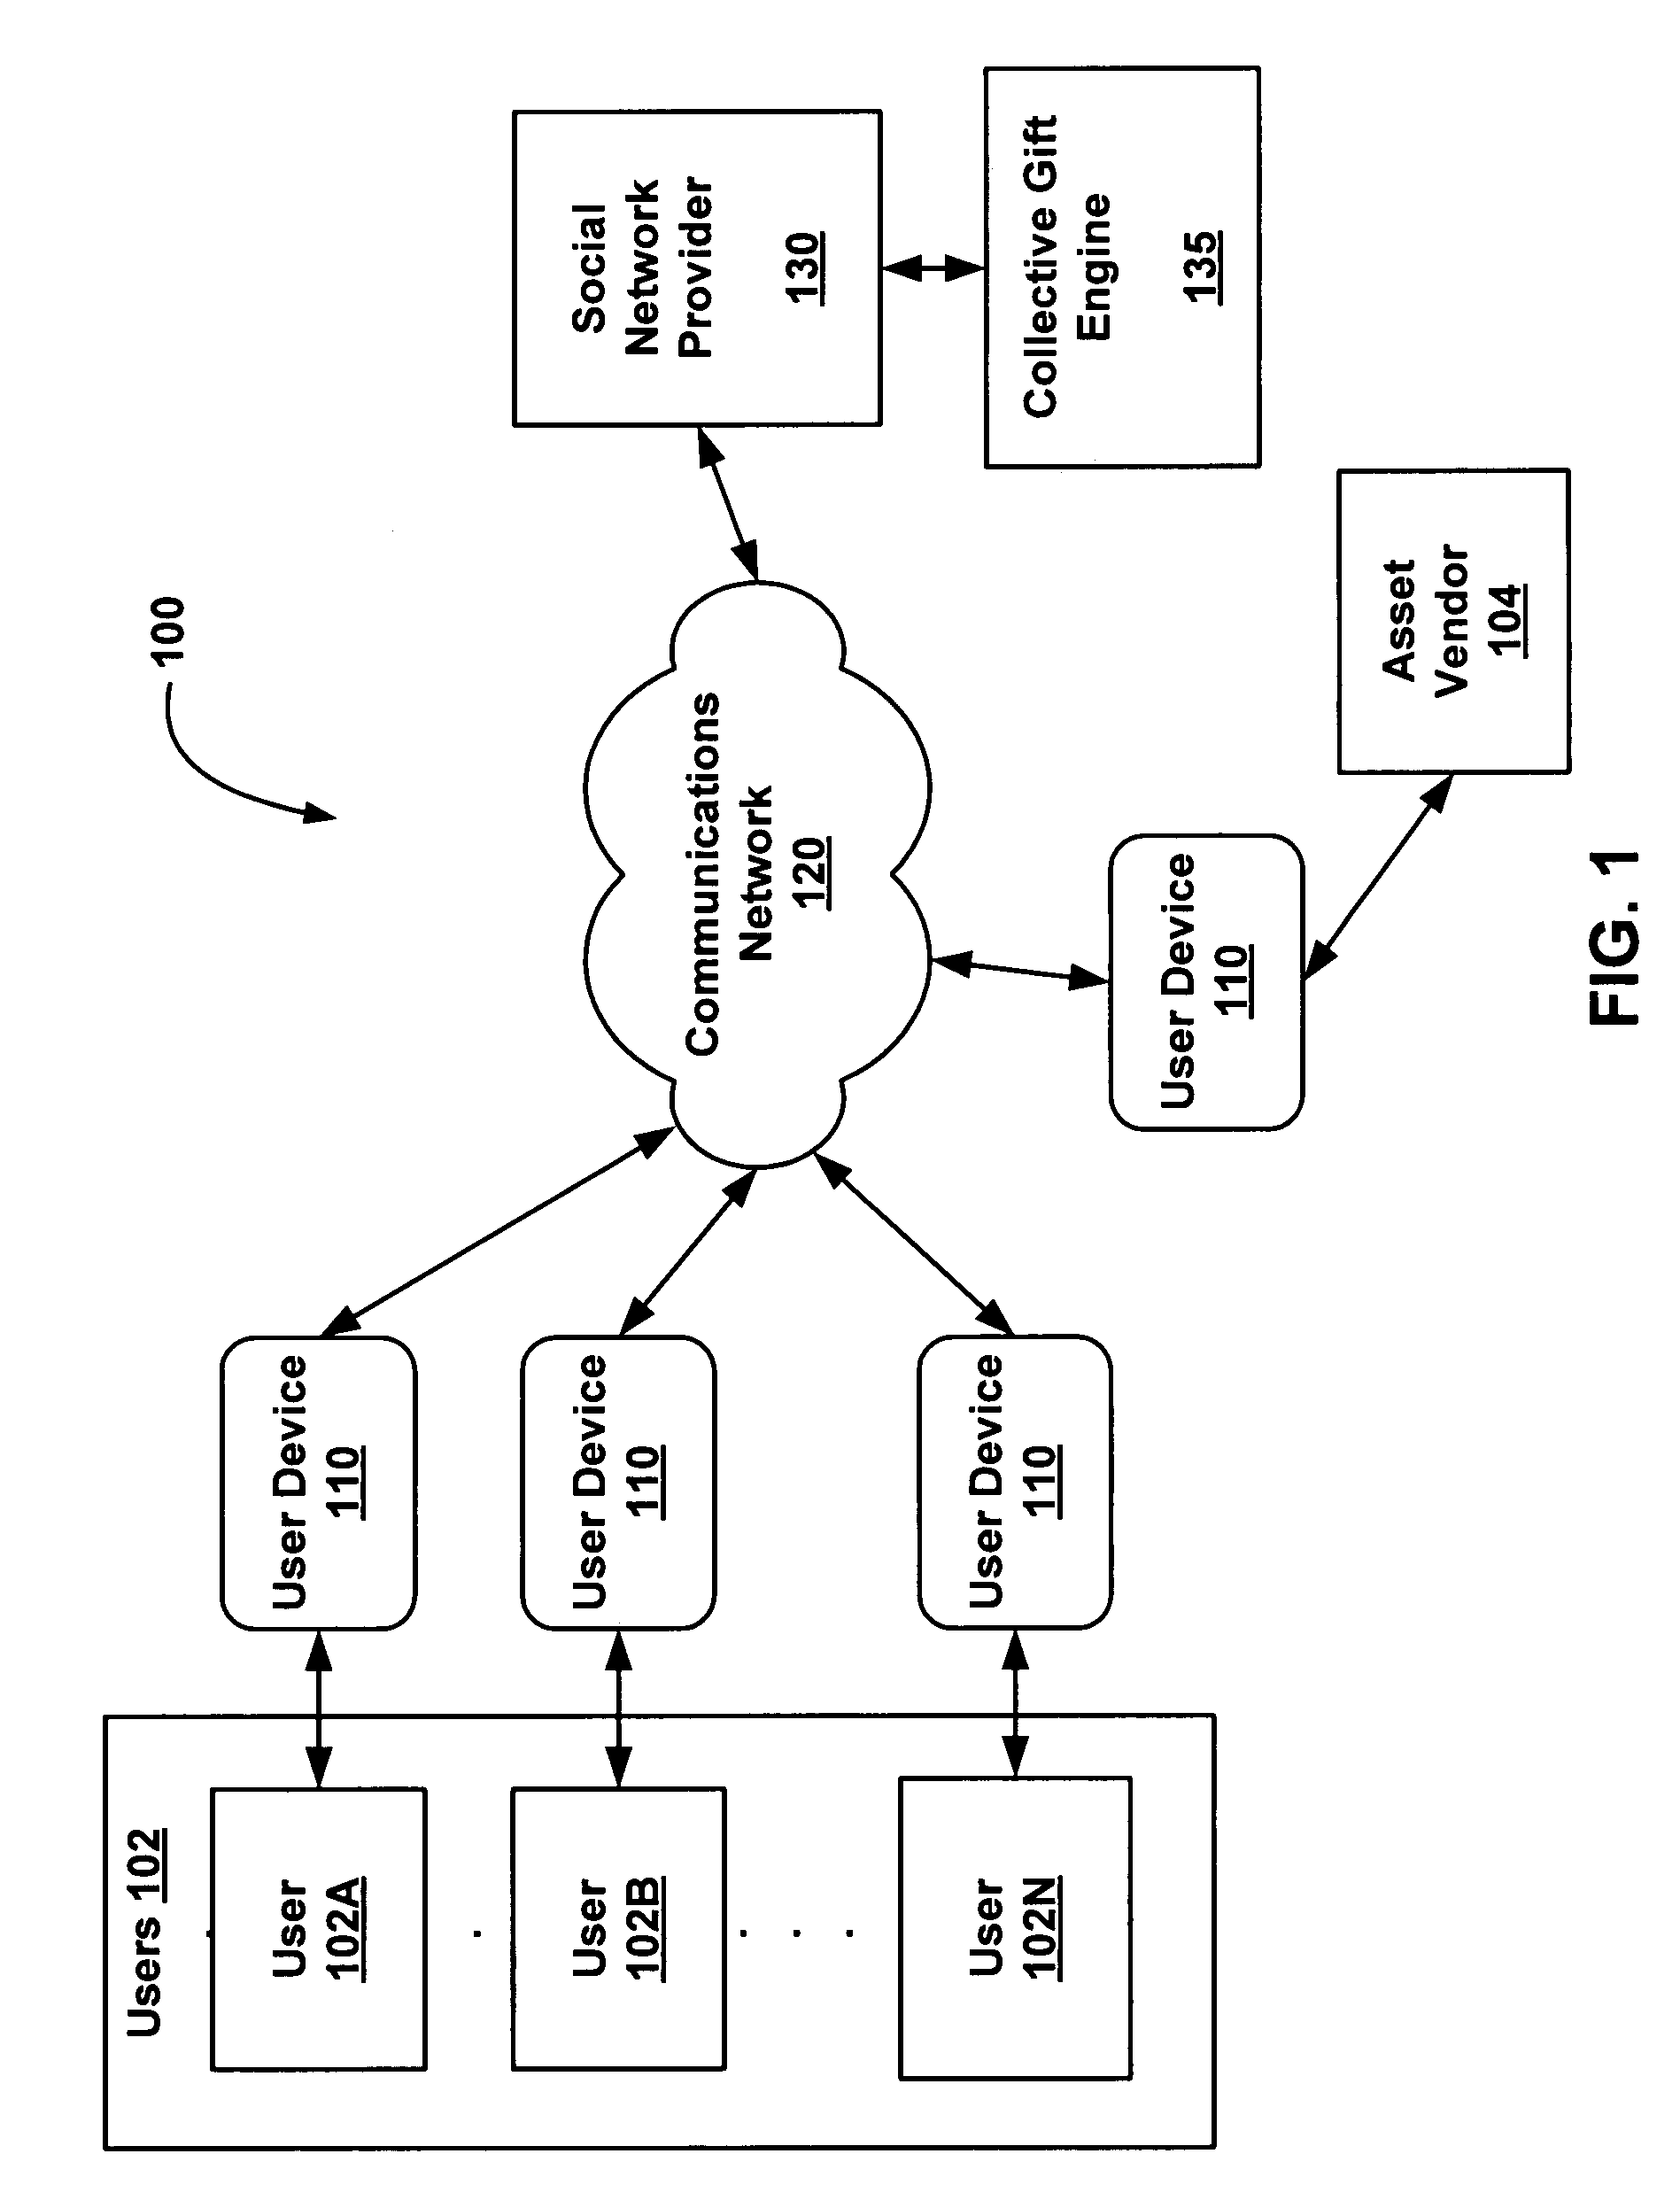 Collectively giving gifts in a social network environment